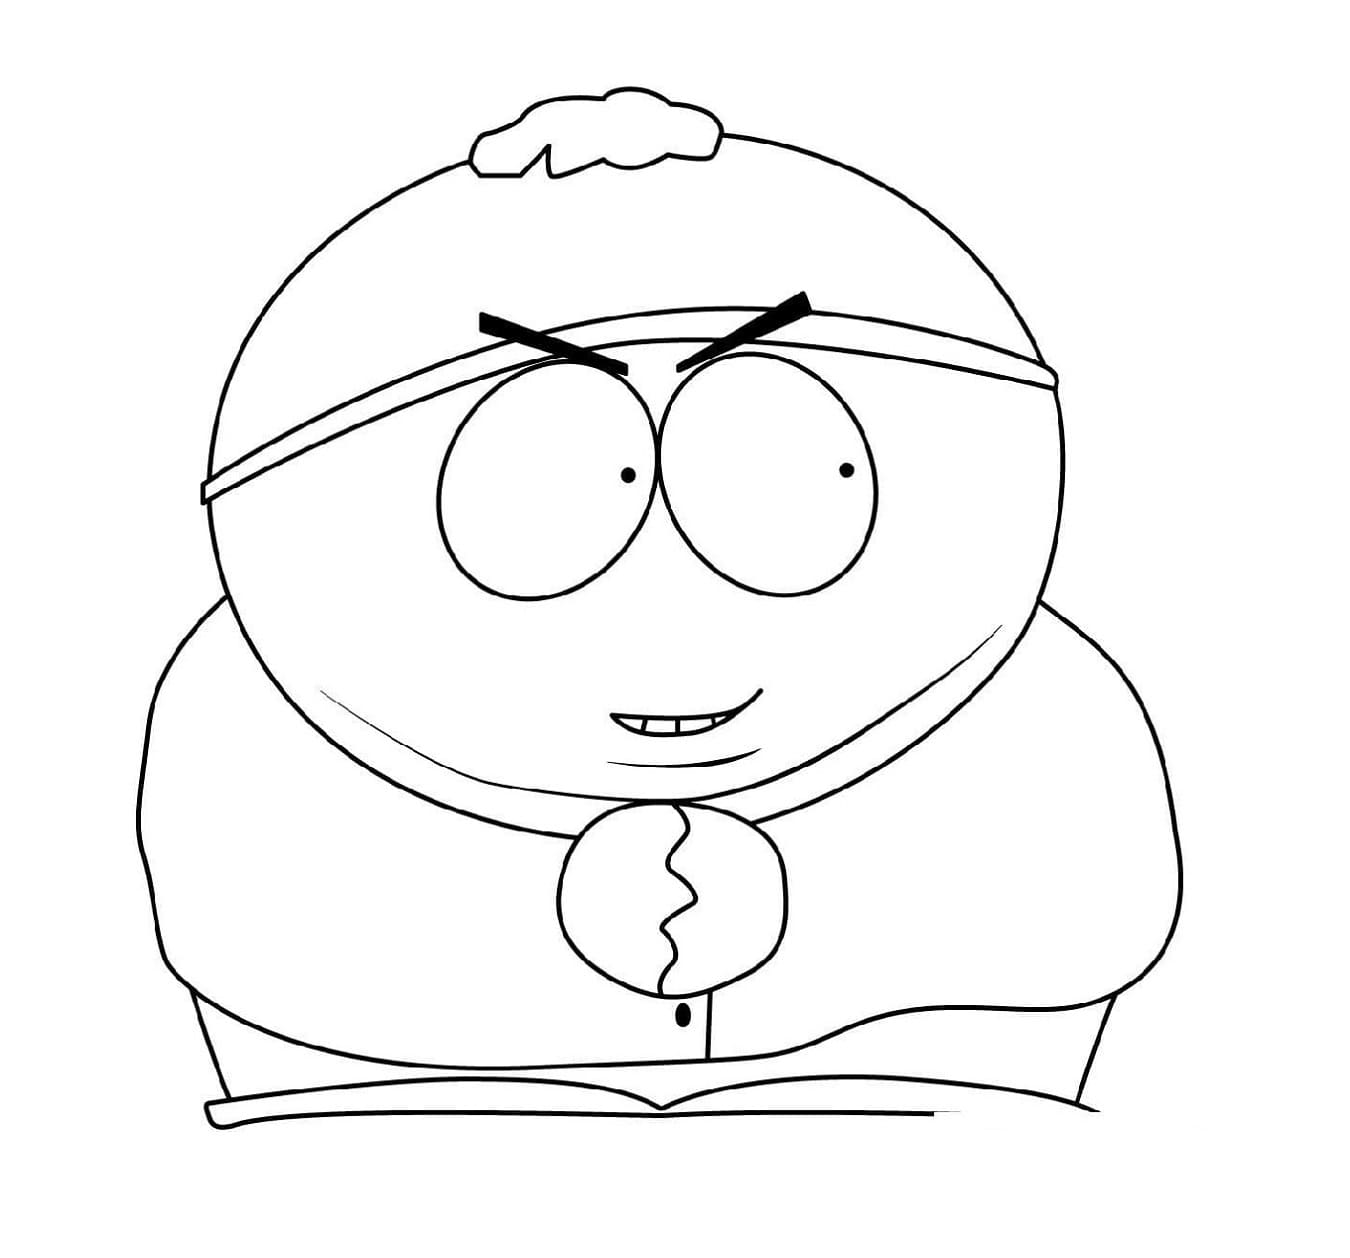 Printable Eric Cartman in South Park Coloring Page